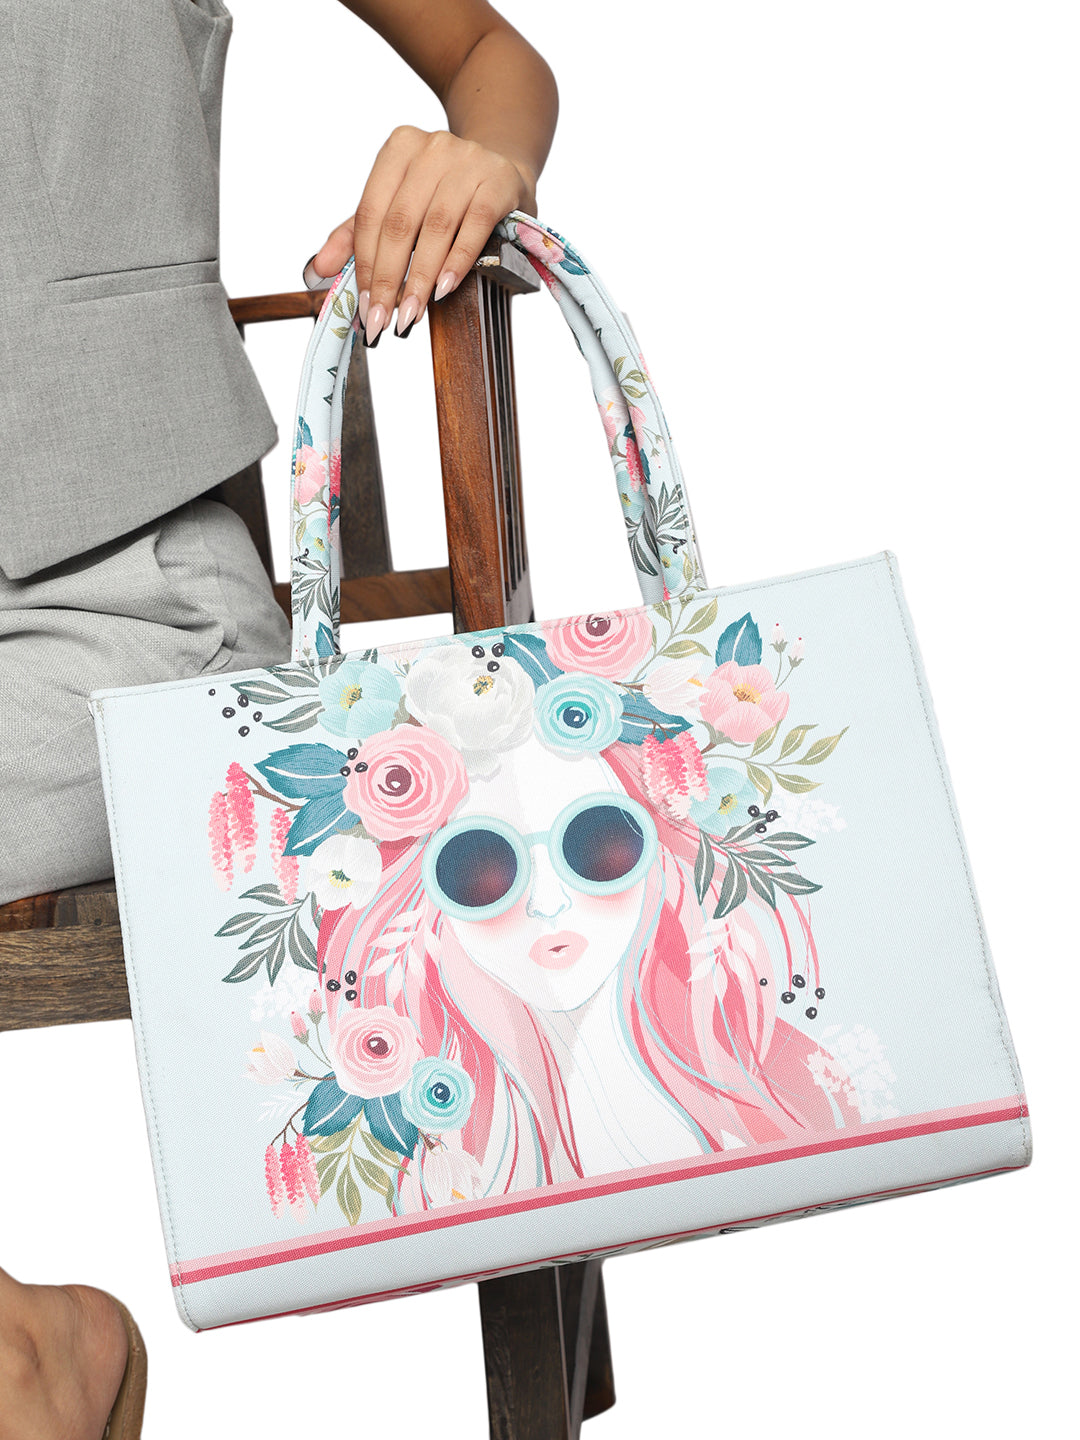 Women's Graphic Printed Canvas Tote Bag(MWCUS019)